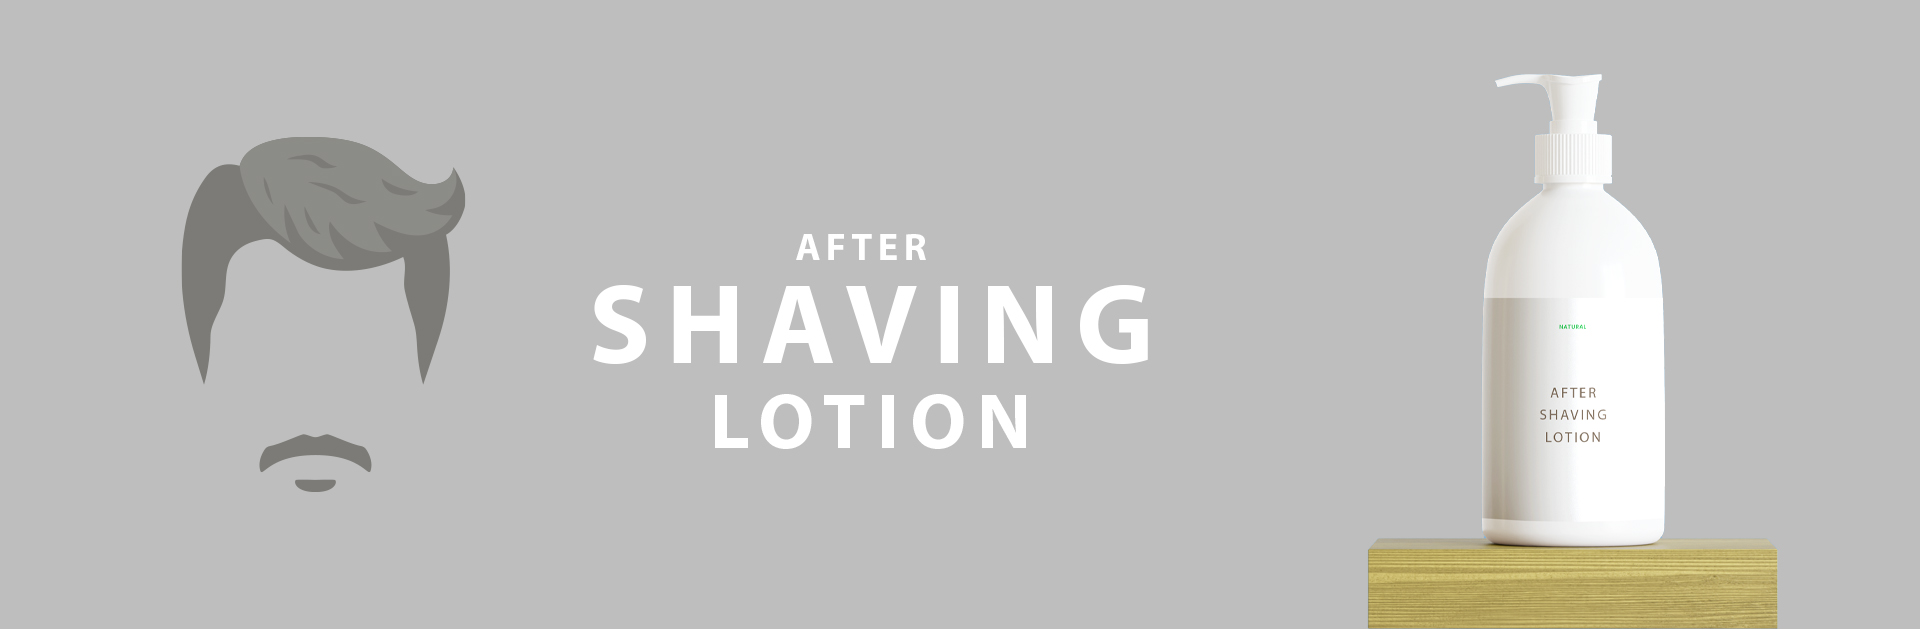 after shaving lotion